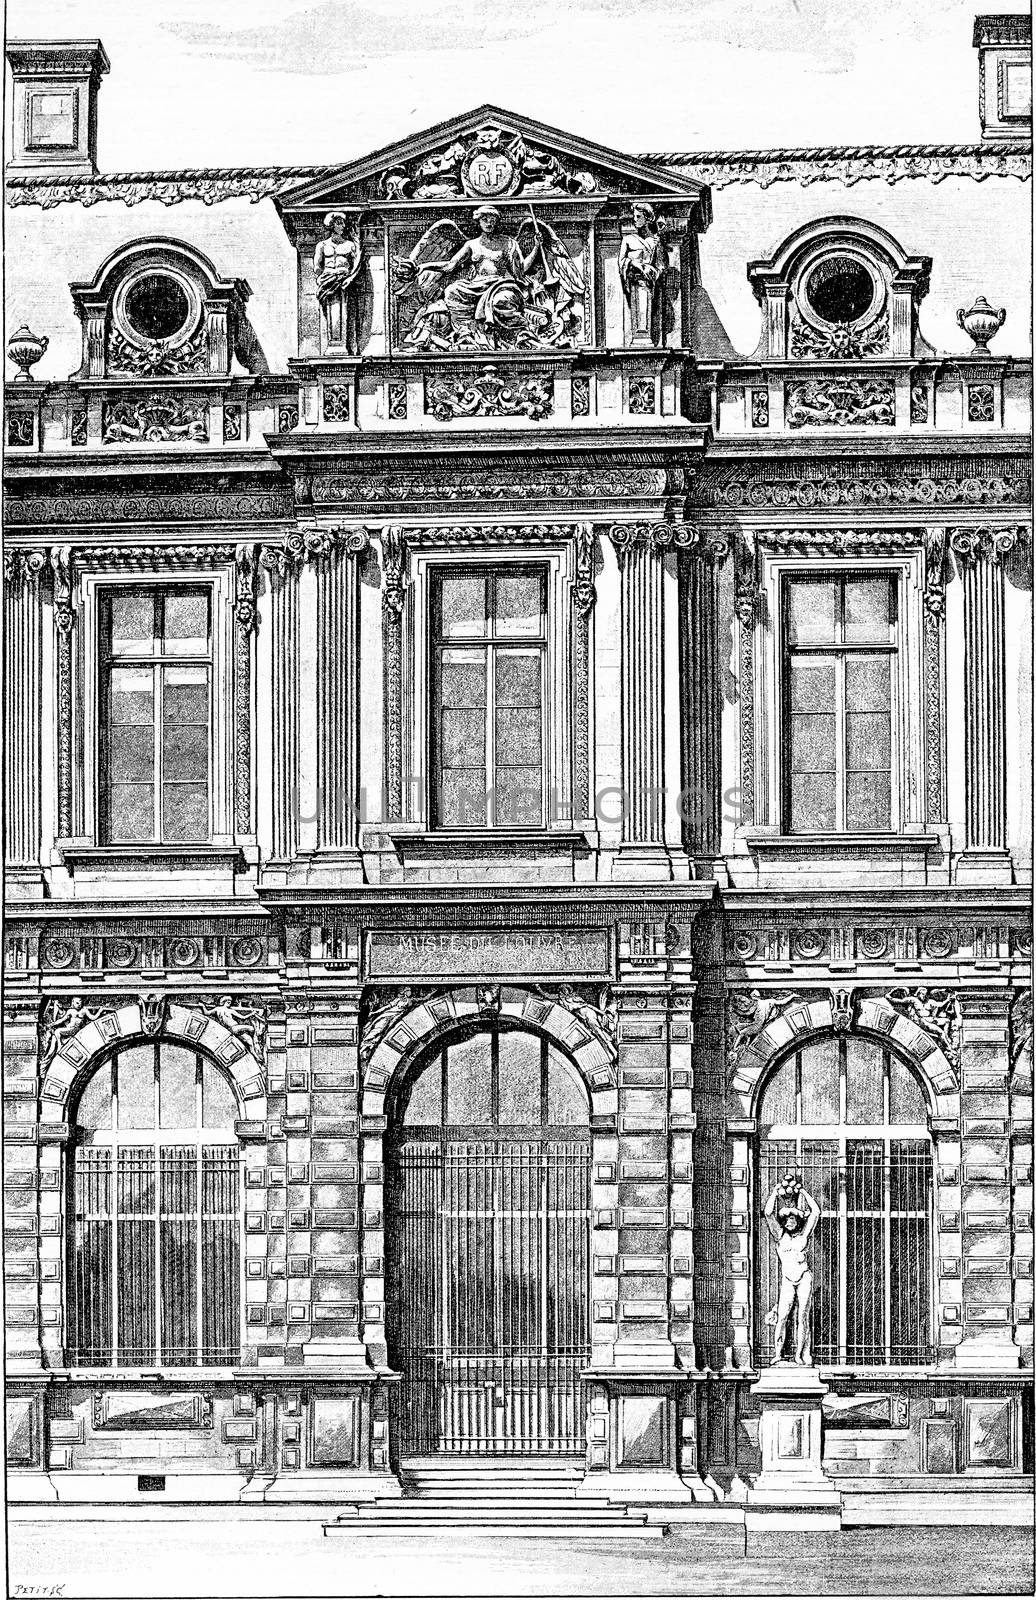 Façade of the Henry IV Gallery at the Jardin de l'Infante at the Louvre Museum in Paris, France. Vintage engraving.
